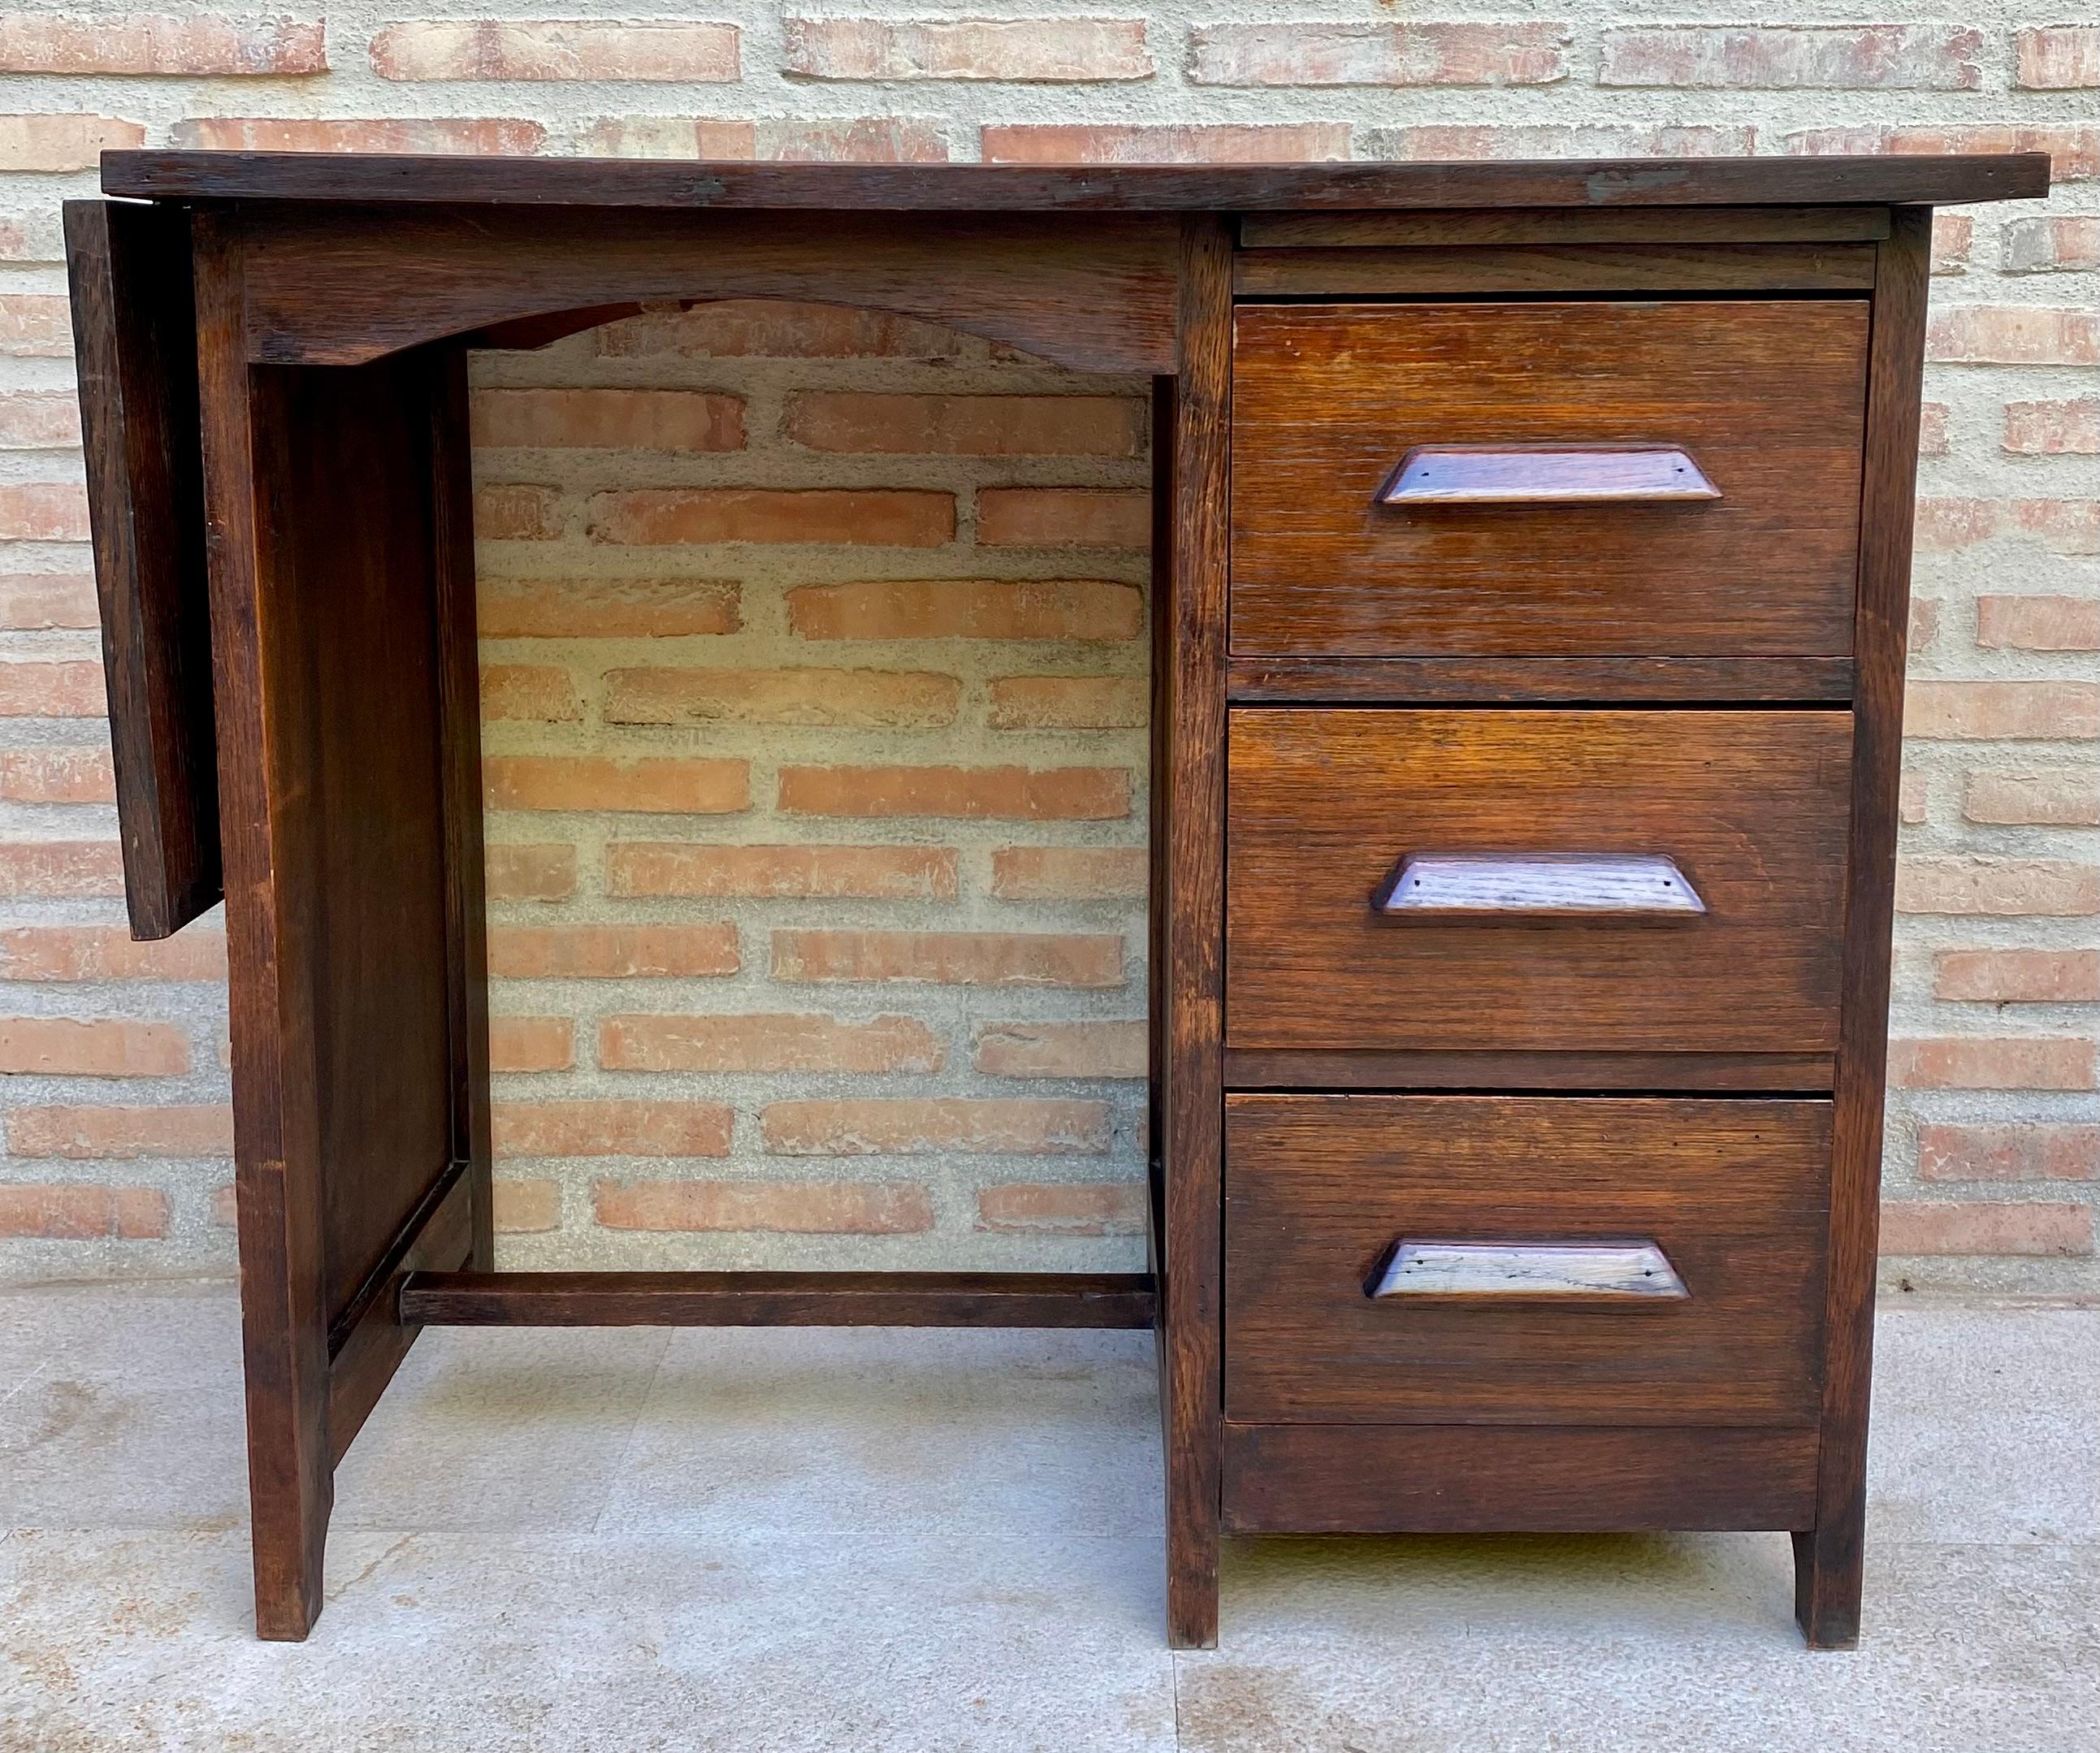 Early 20Th Century Spanish Desk or Work Table in Oak Wood with Lateral Wing